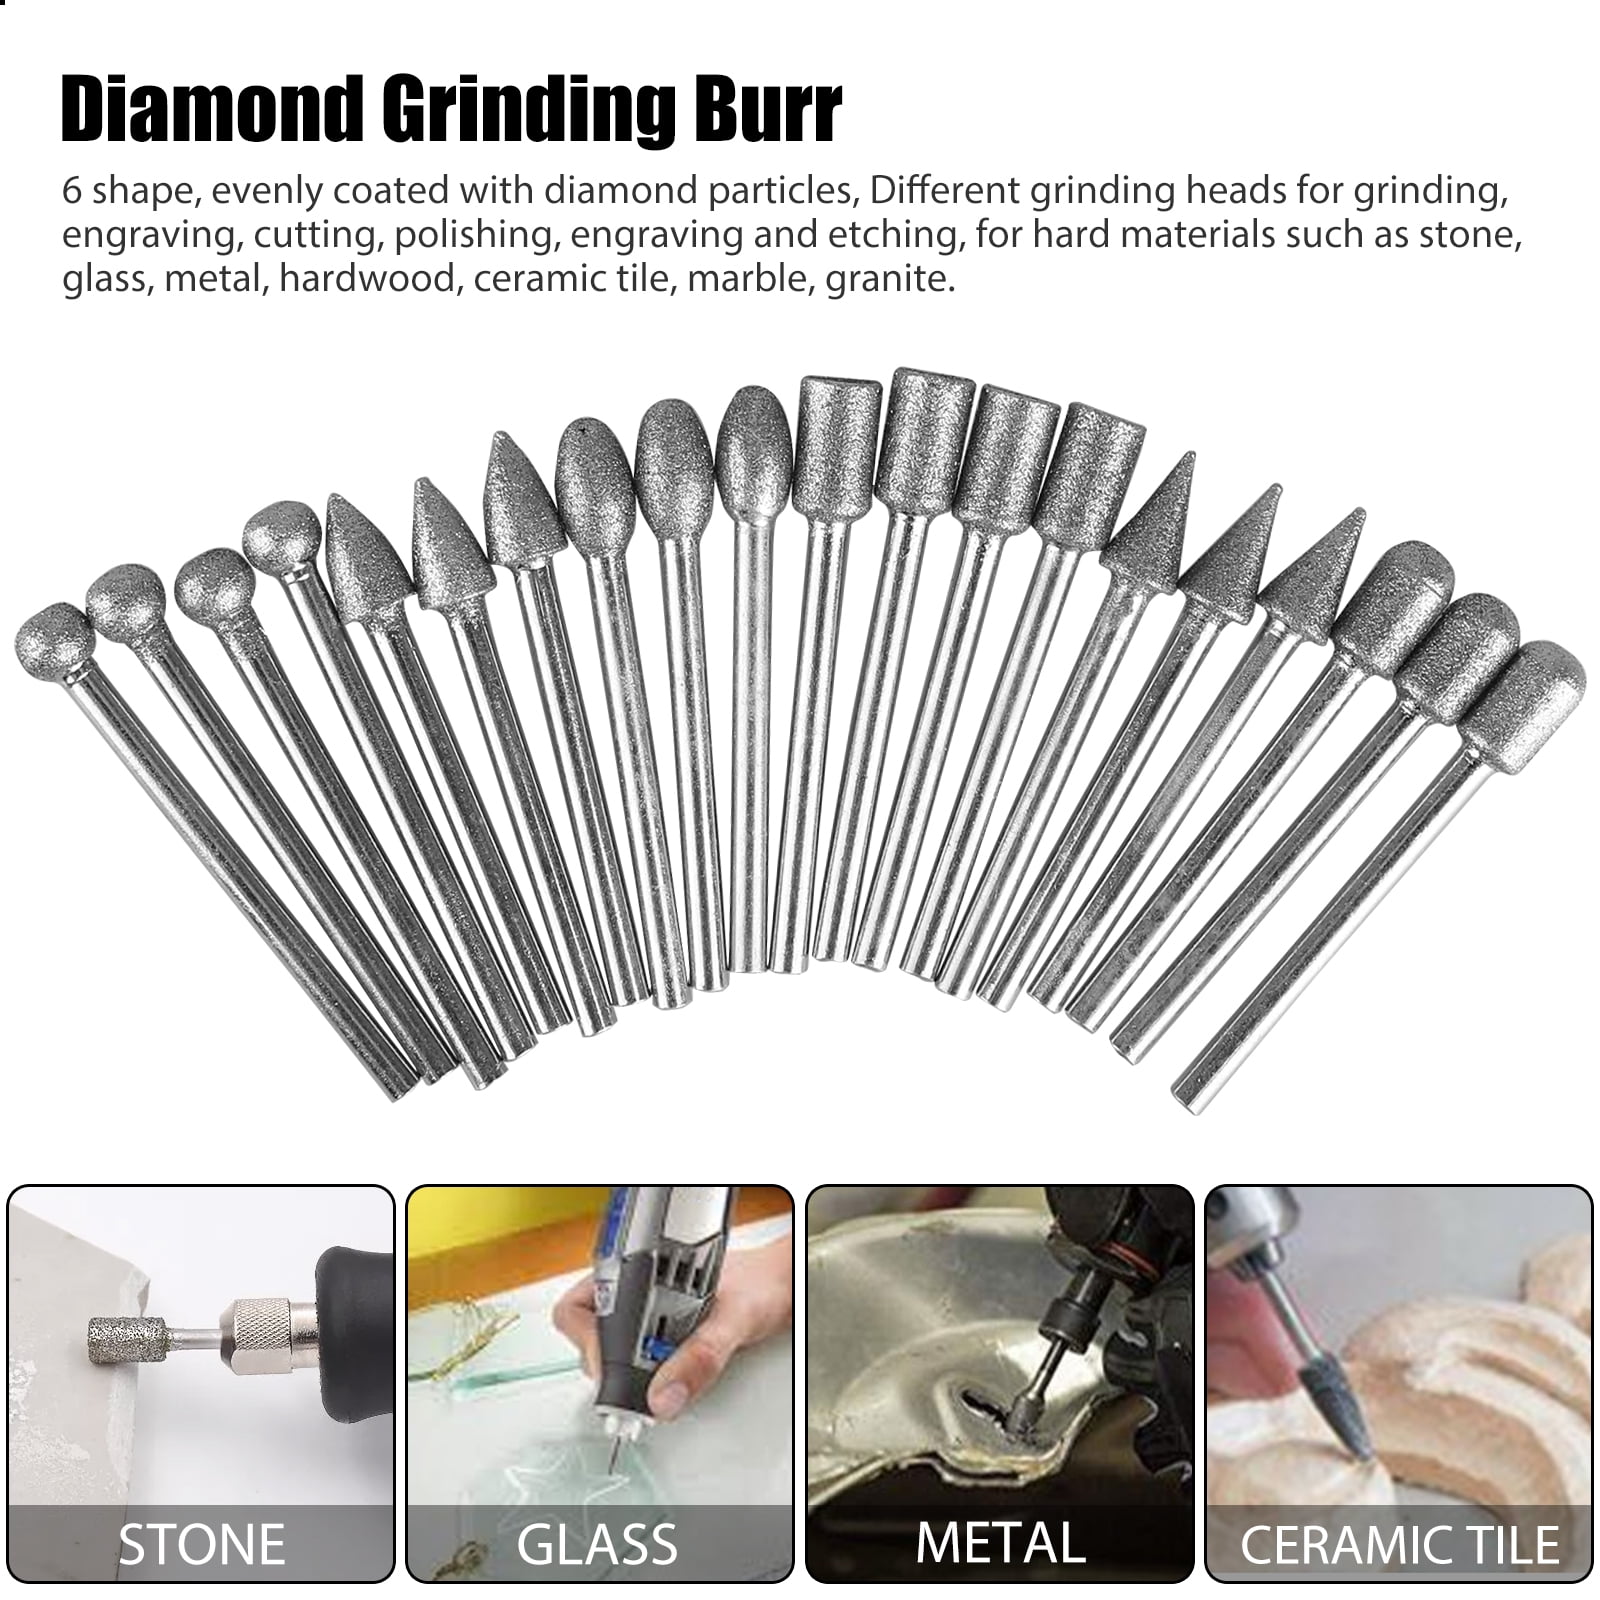 1/8 inch Shank Rock Carving and Engraving Bits for Glass 60 Grit Rotary Diamond Grinding Bit Sets Rocks Ceramics Gemstone Metal 